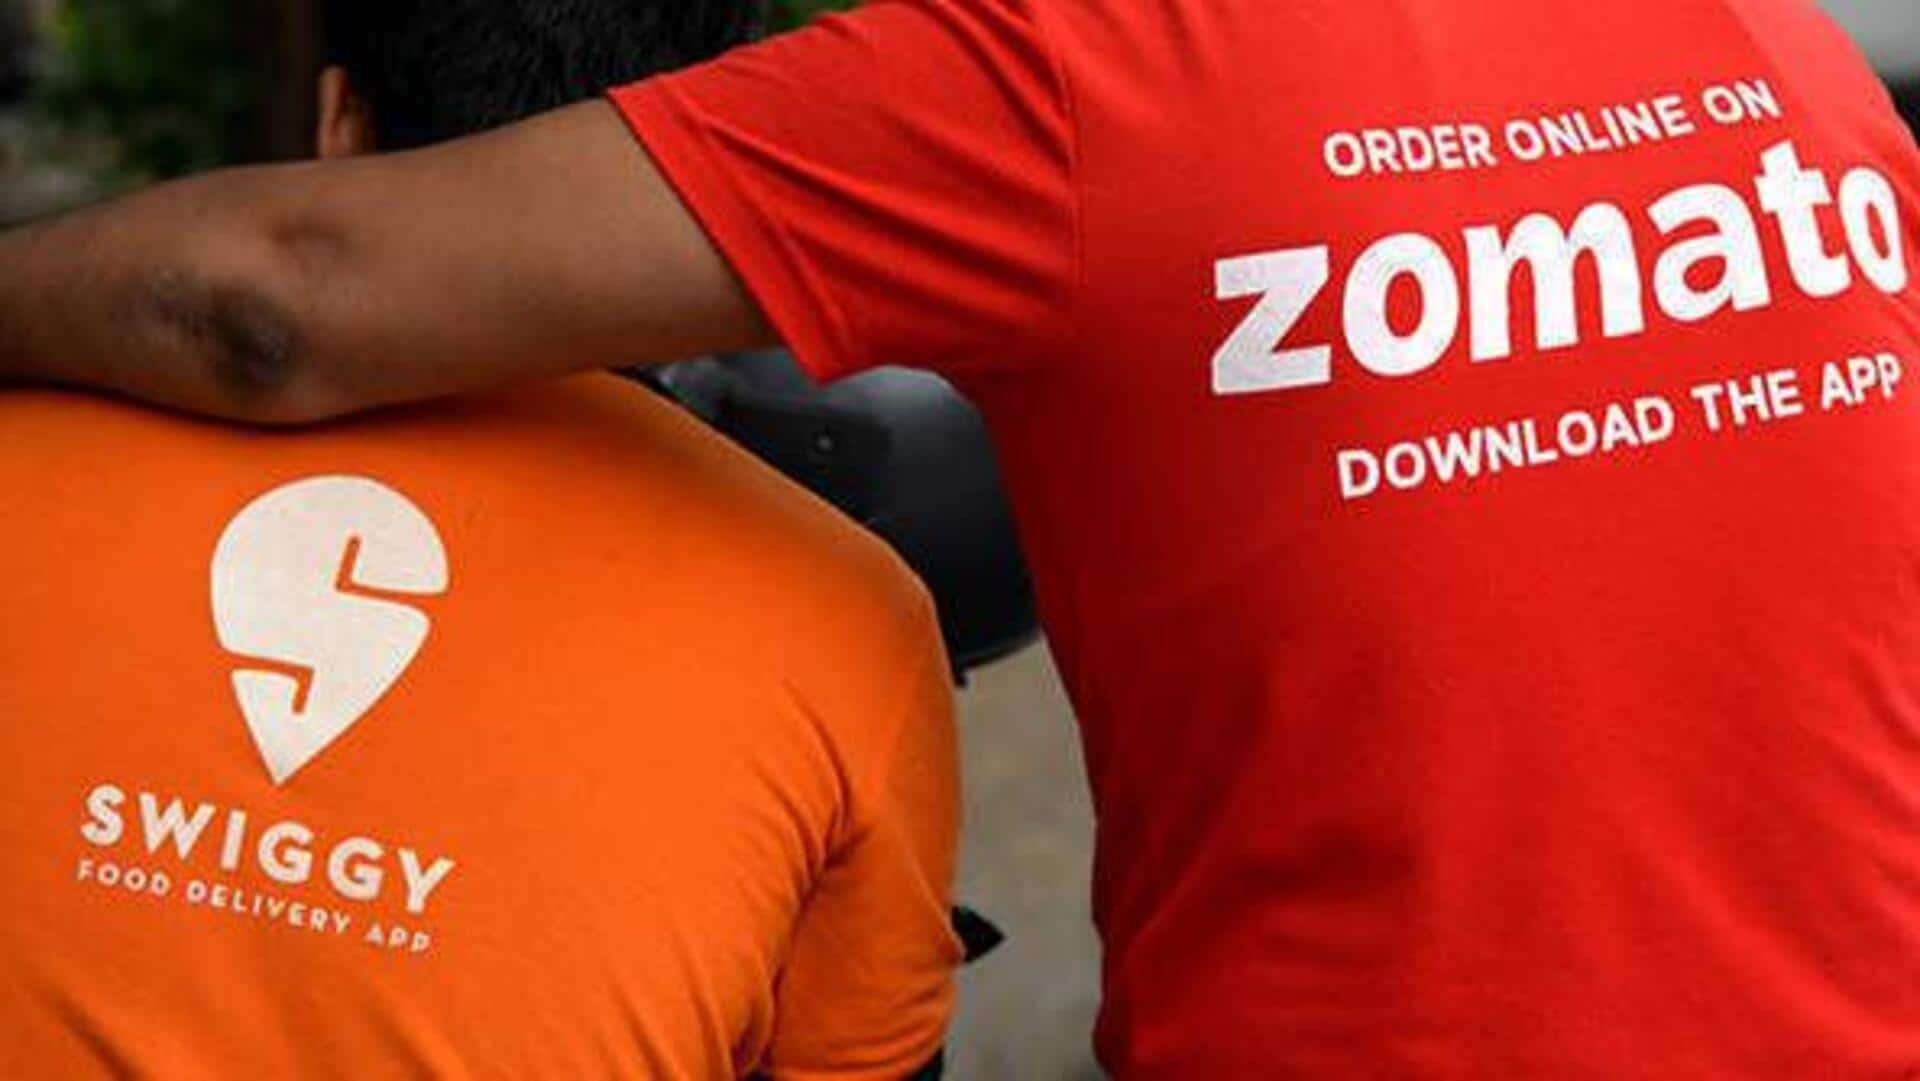 Zomato and Swiggy receive GST notices totaling Rs. 750 crore